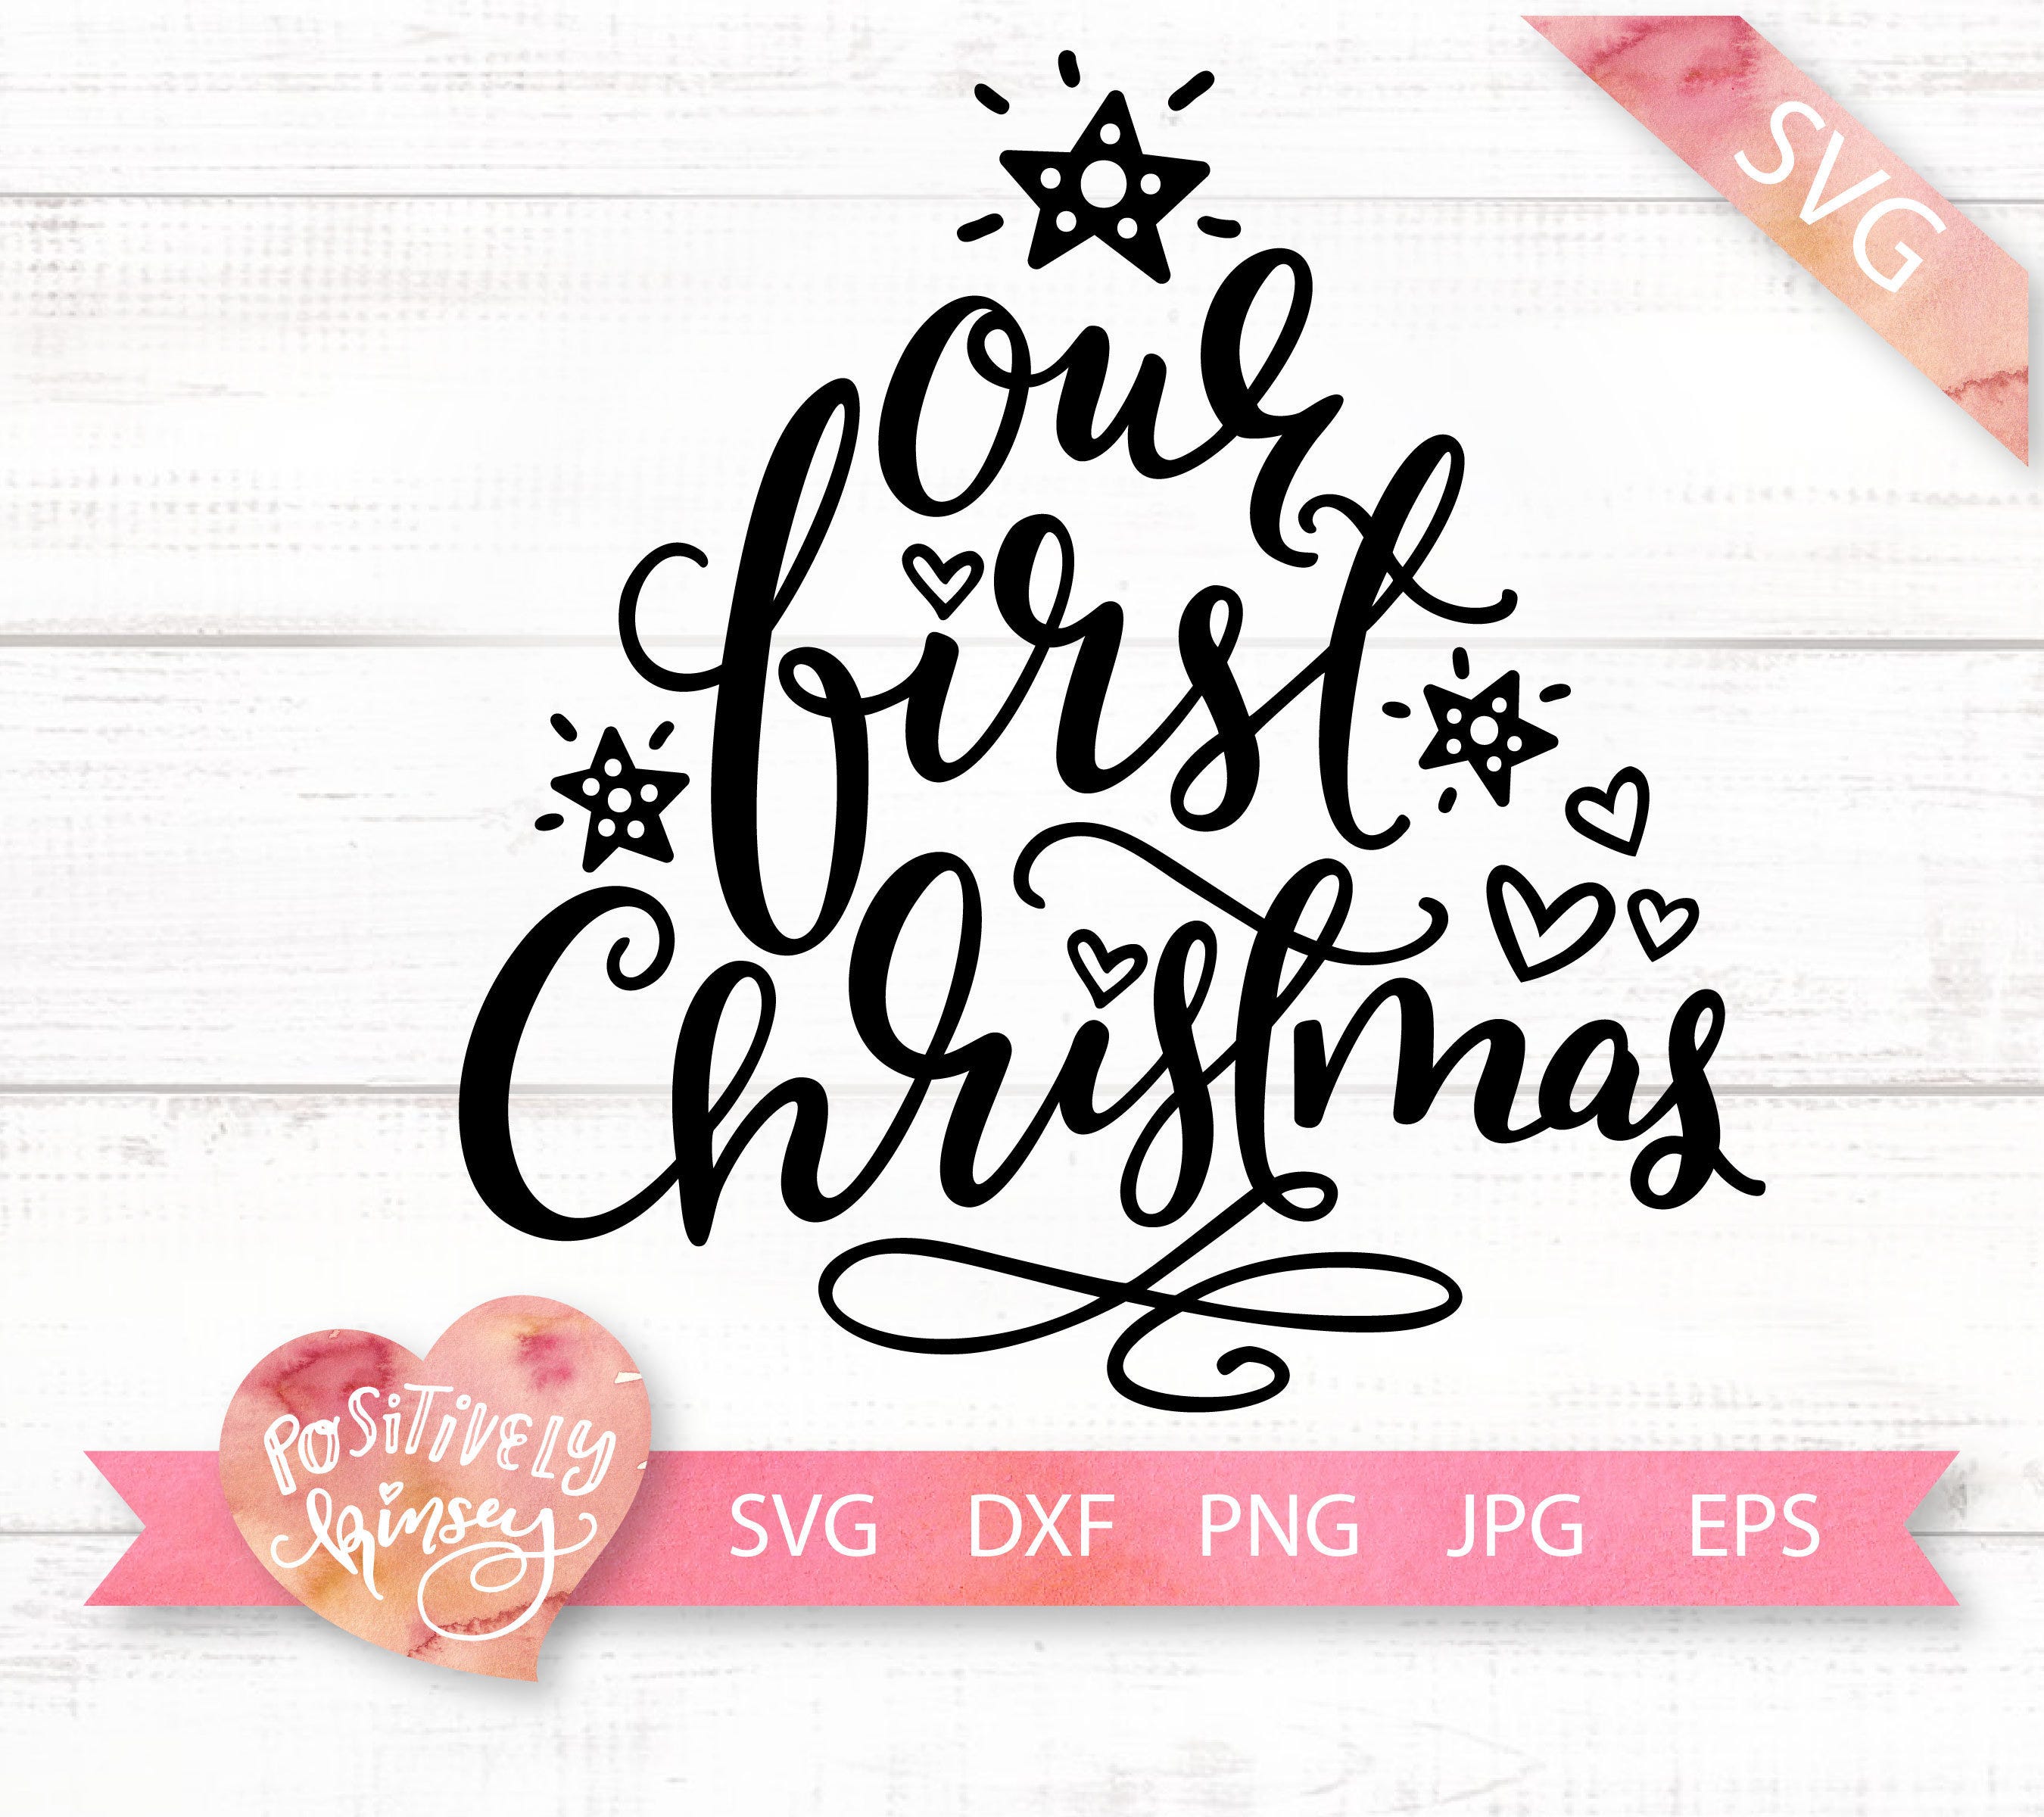 Our First Christmas SVG, Family Christmas Ornament Svg, Family Christmas Svg, 1st Christmas Shirt Svg Files for Cricut, Dxf, Png, Clipart